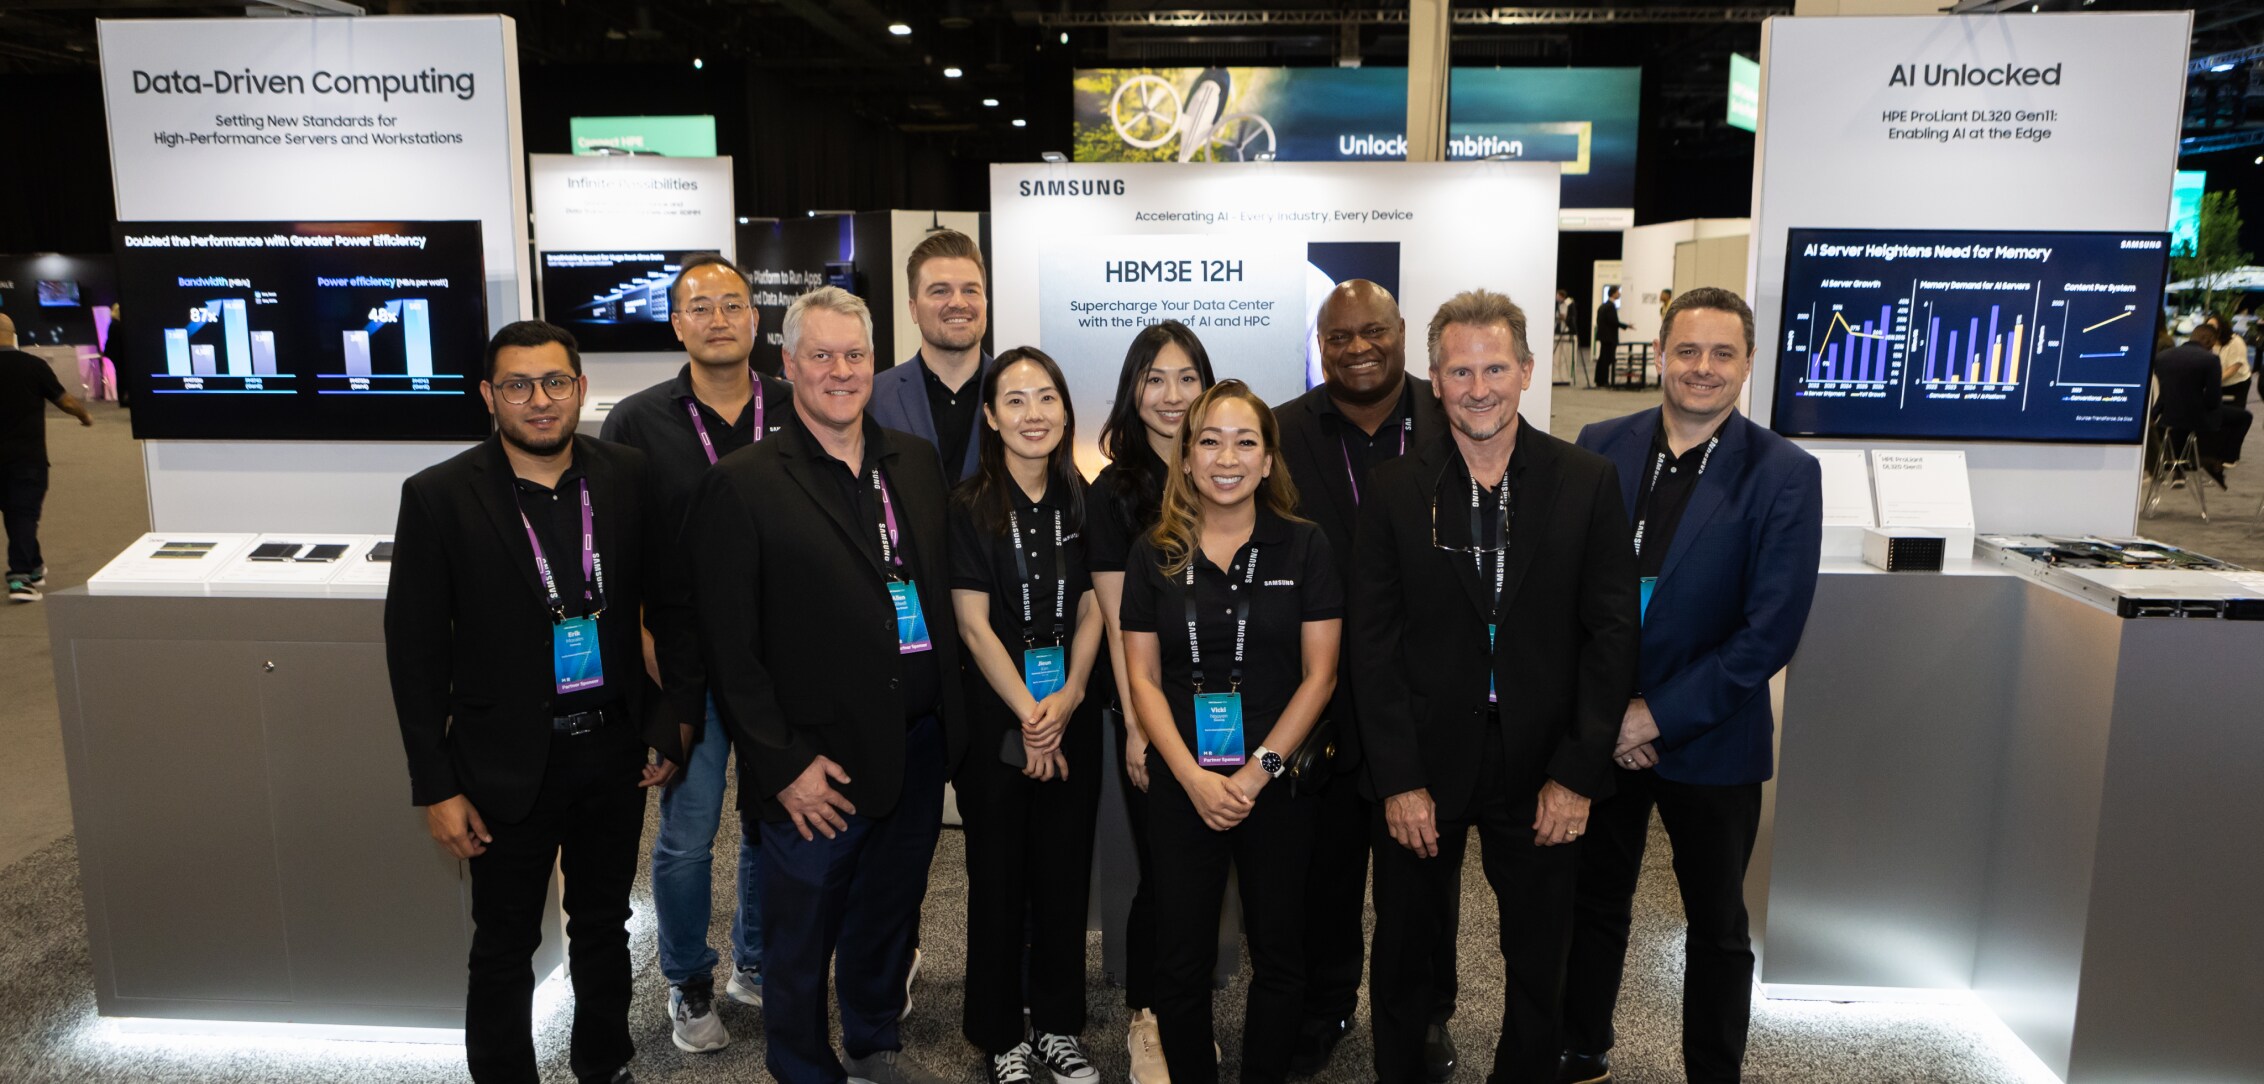 A group of Samsung team members posing in front of their Data-Driven Computing and AI Unlocked exhibits at HPE Discover 2024.